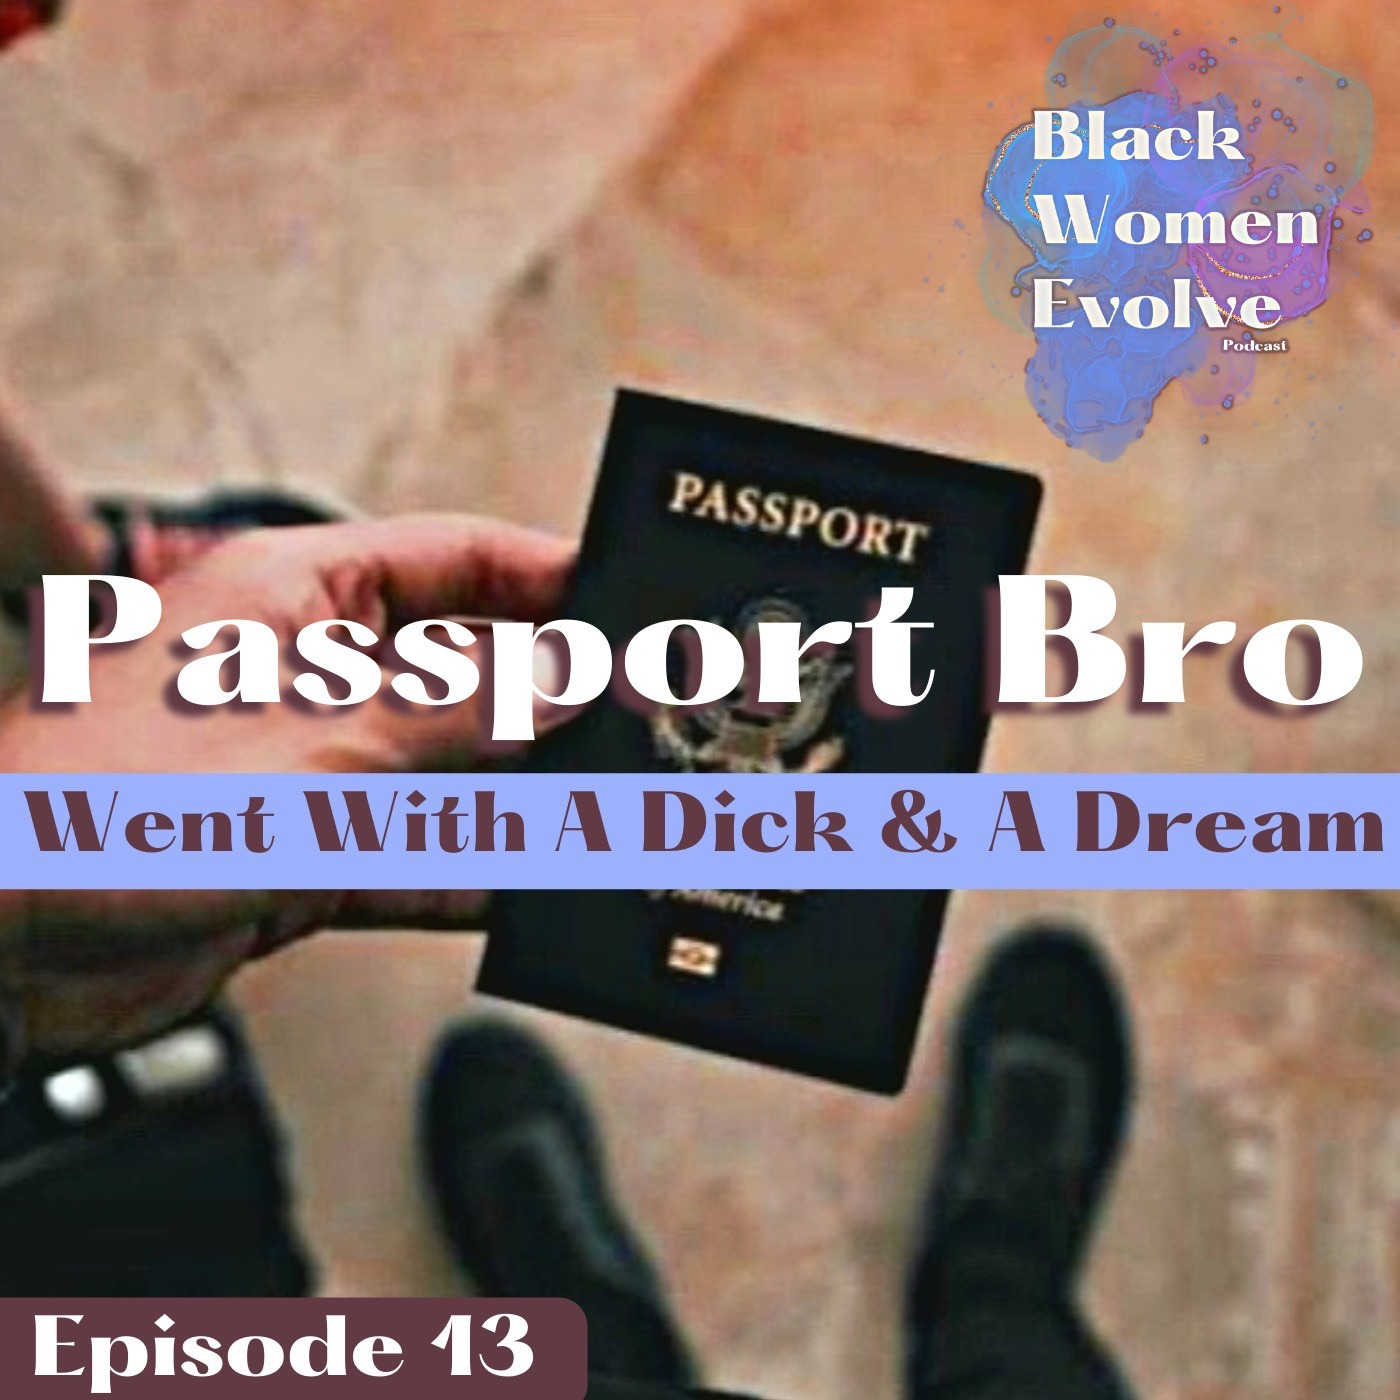 Passport Bro Went With A D*ck And A Dream